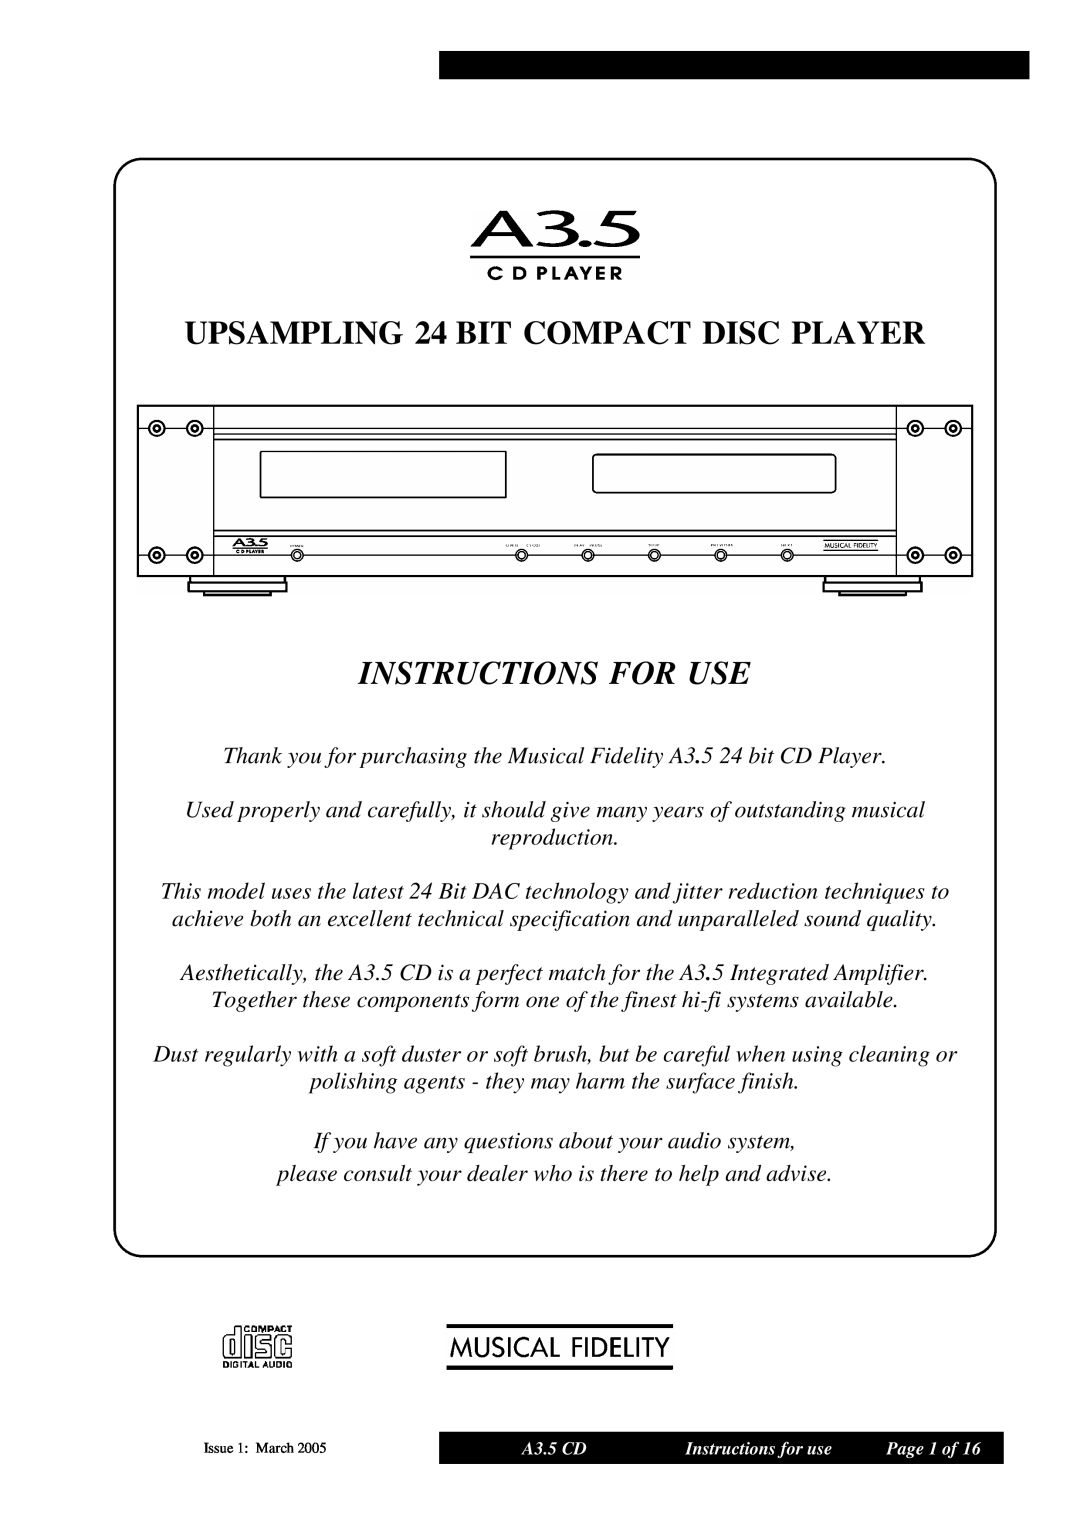 Musical Fidelity A3.5 manual Instructions For Use, UPSAMPLING 24 BIT COMPACT DISC PLAYER 